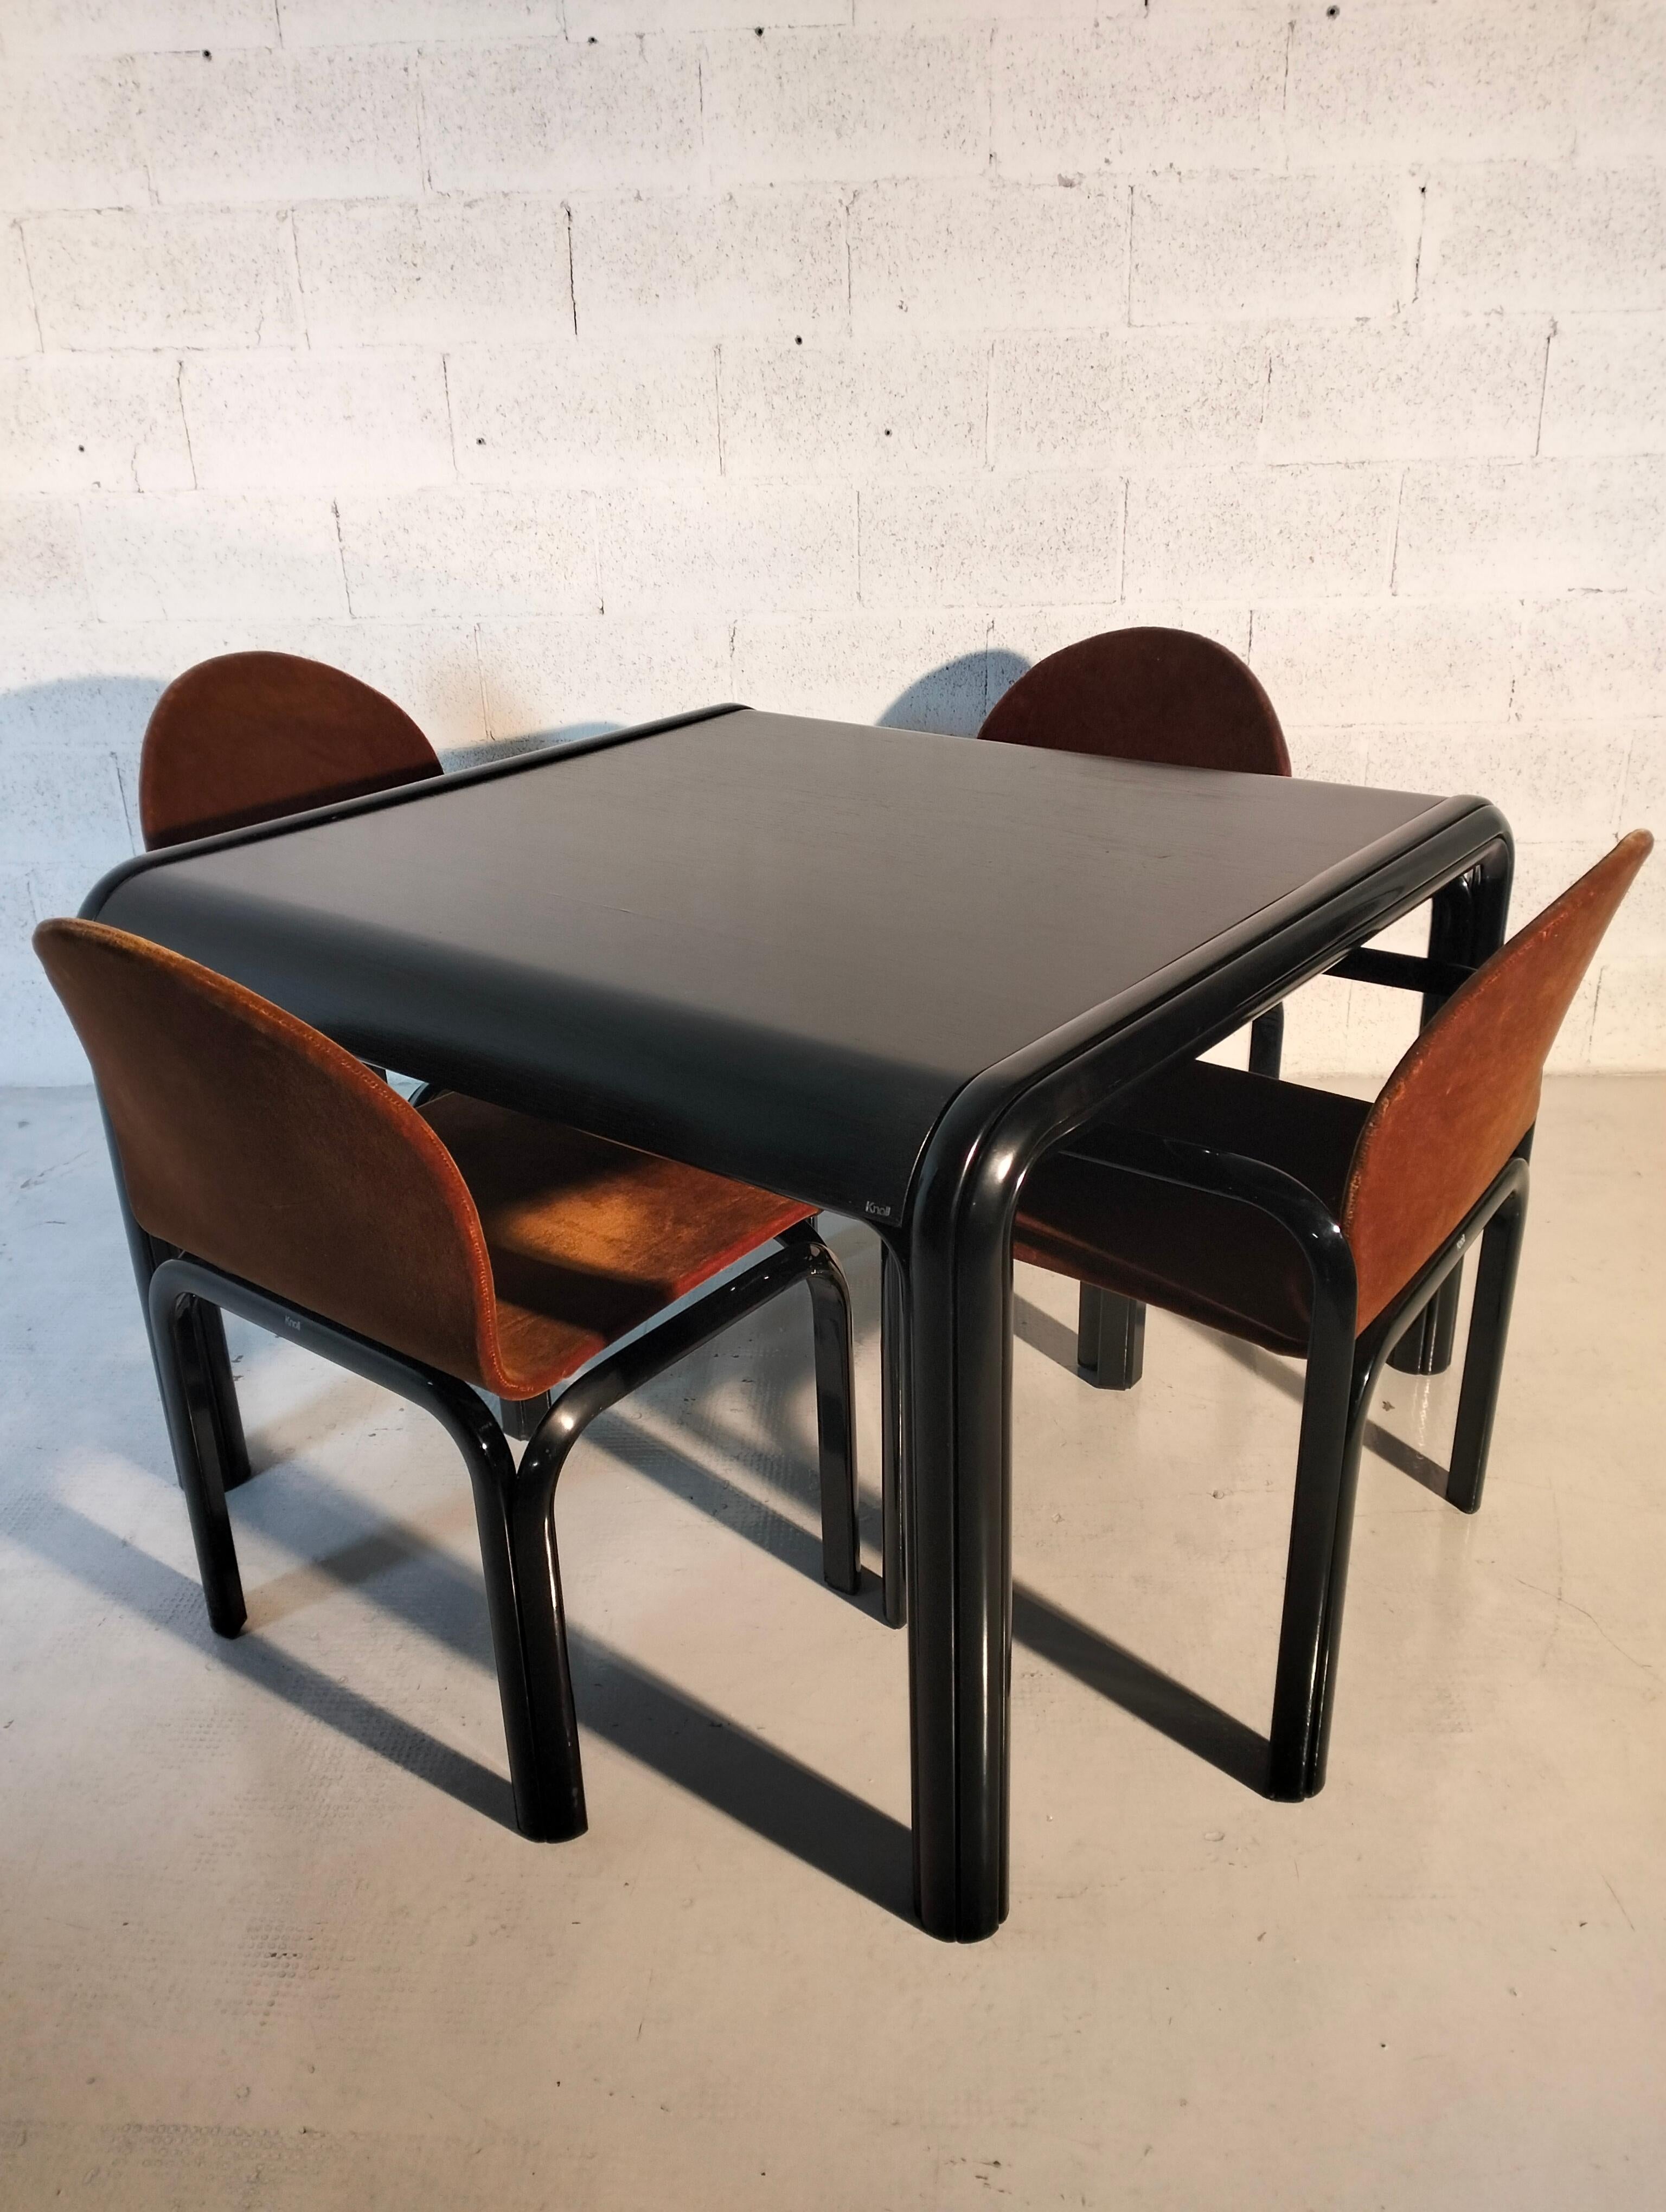 Italian Set of 4 chairs and 1 square table Orsay mod. by Gae Aulenti for Knoll 80s For Sale